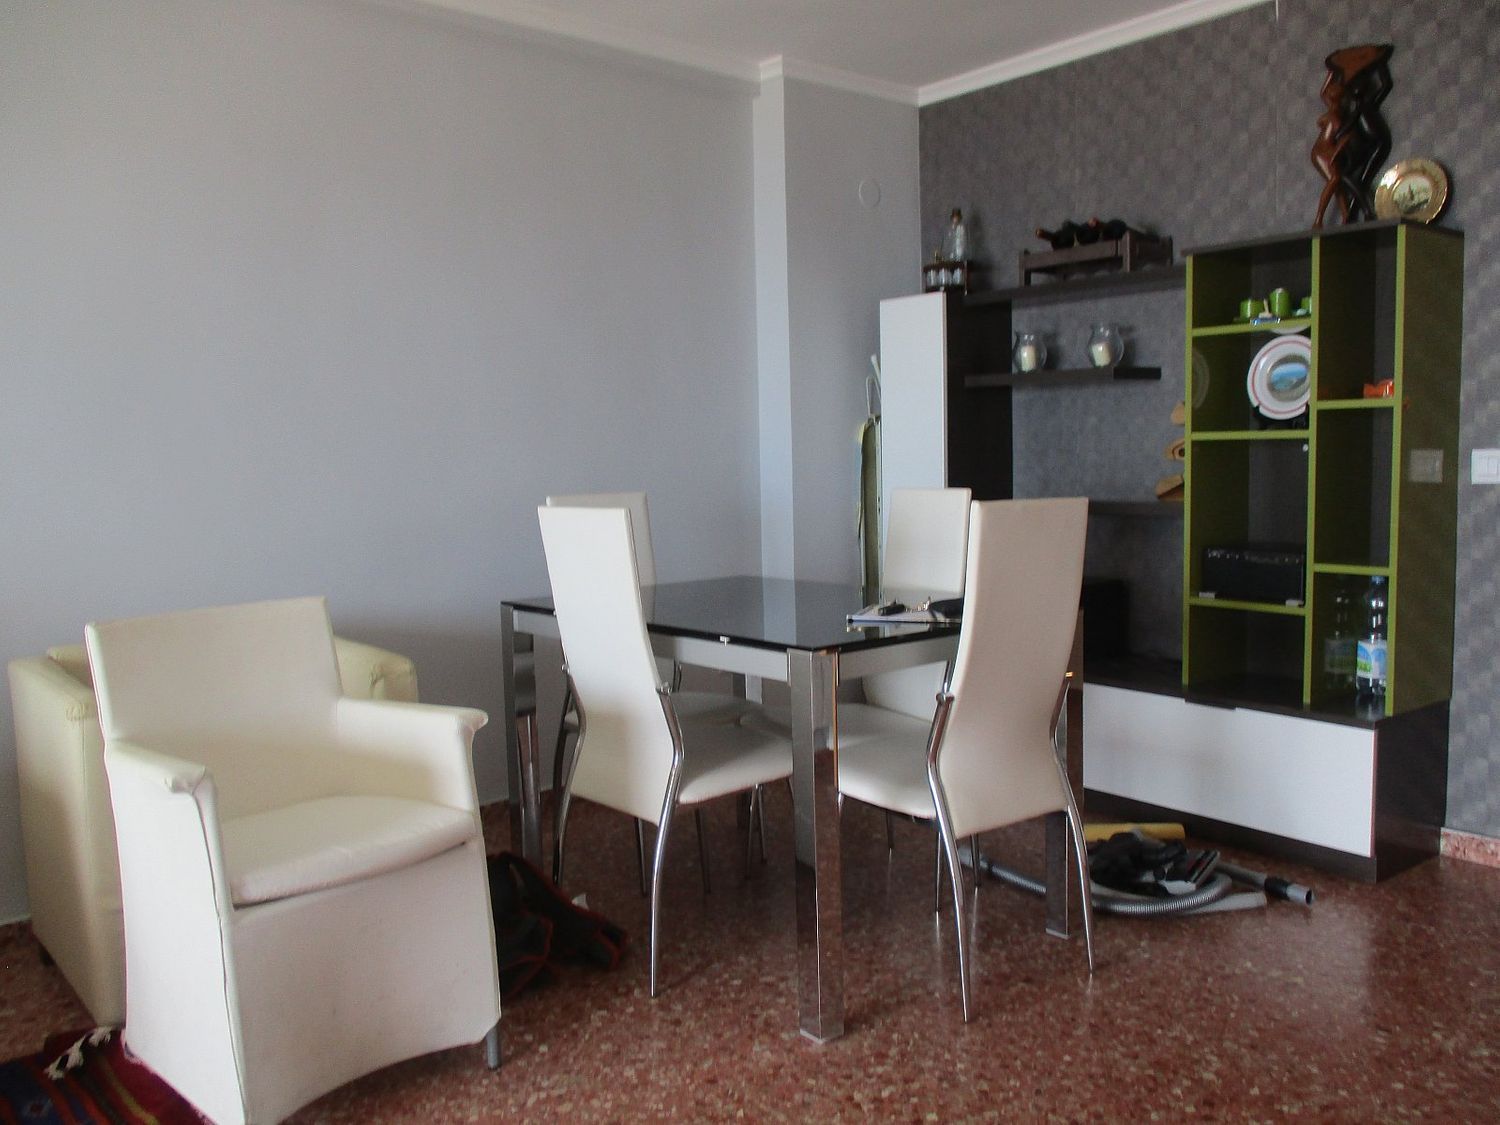 Apartment for sale on the seafront in Cullera